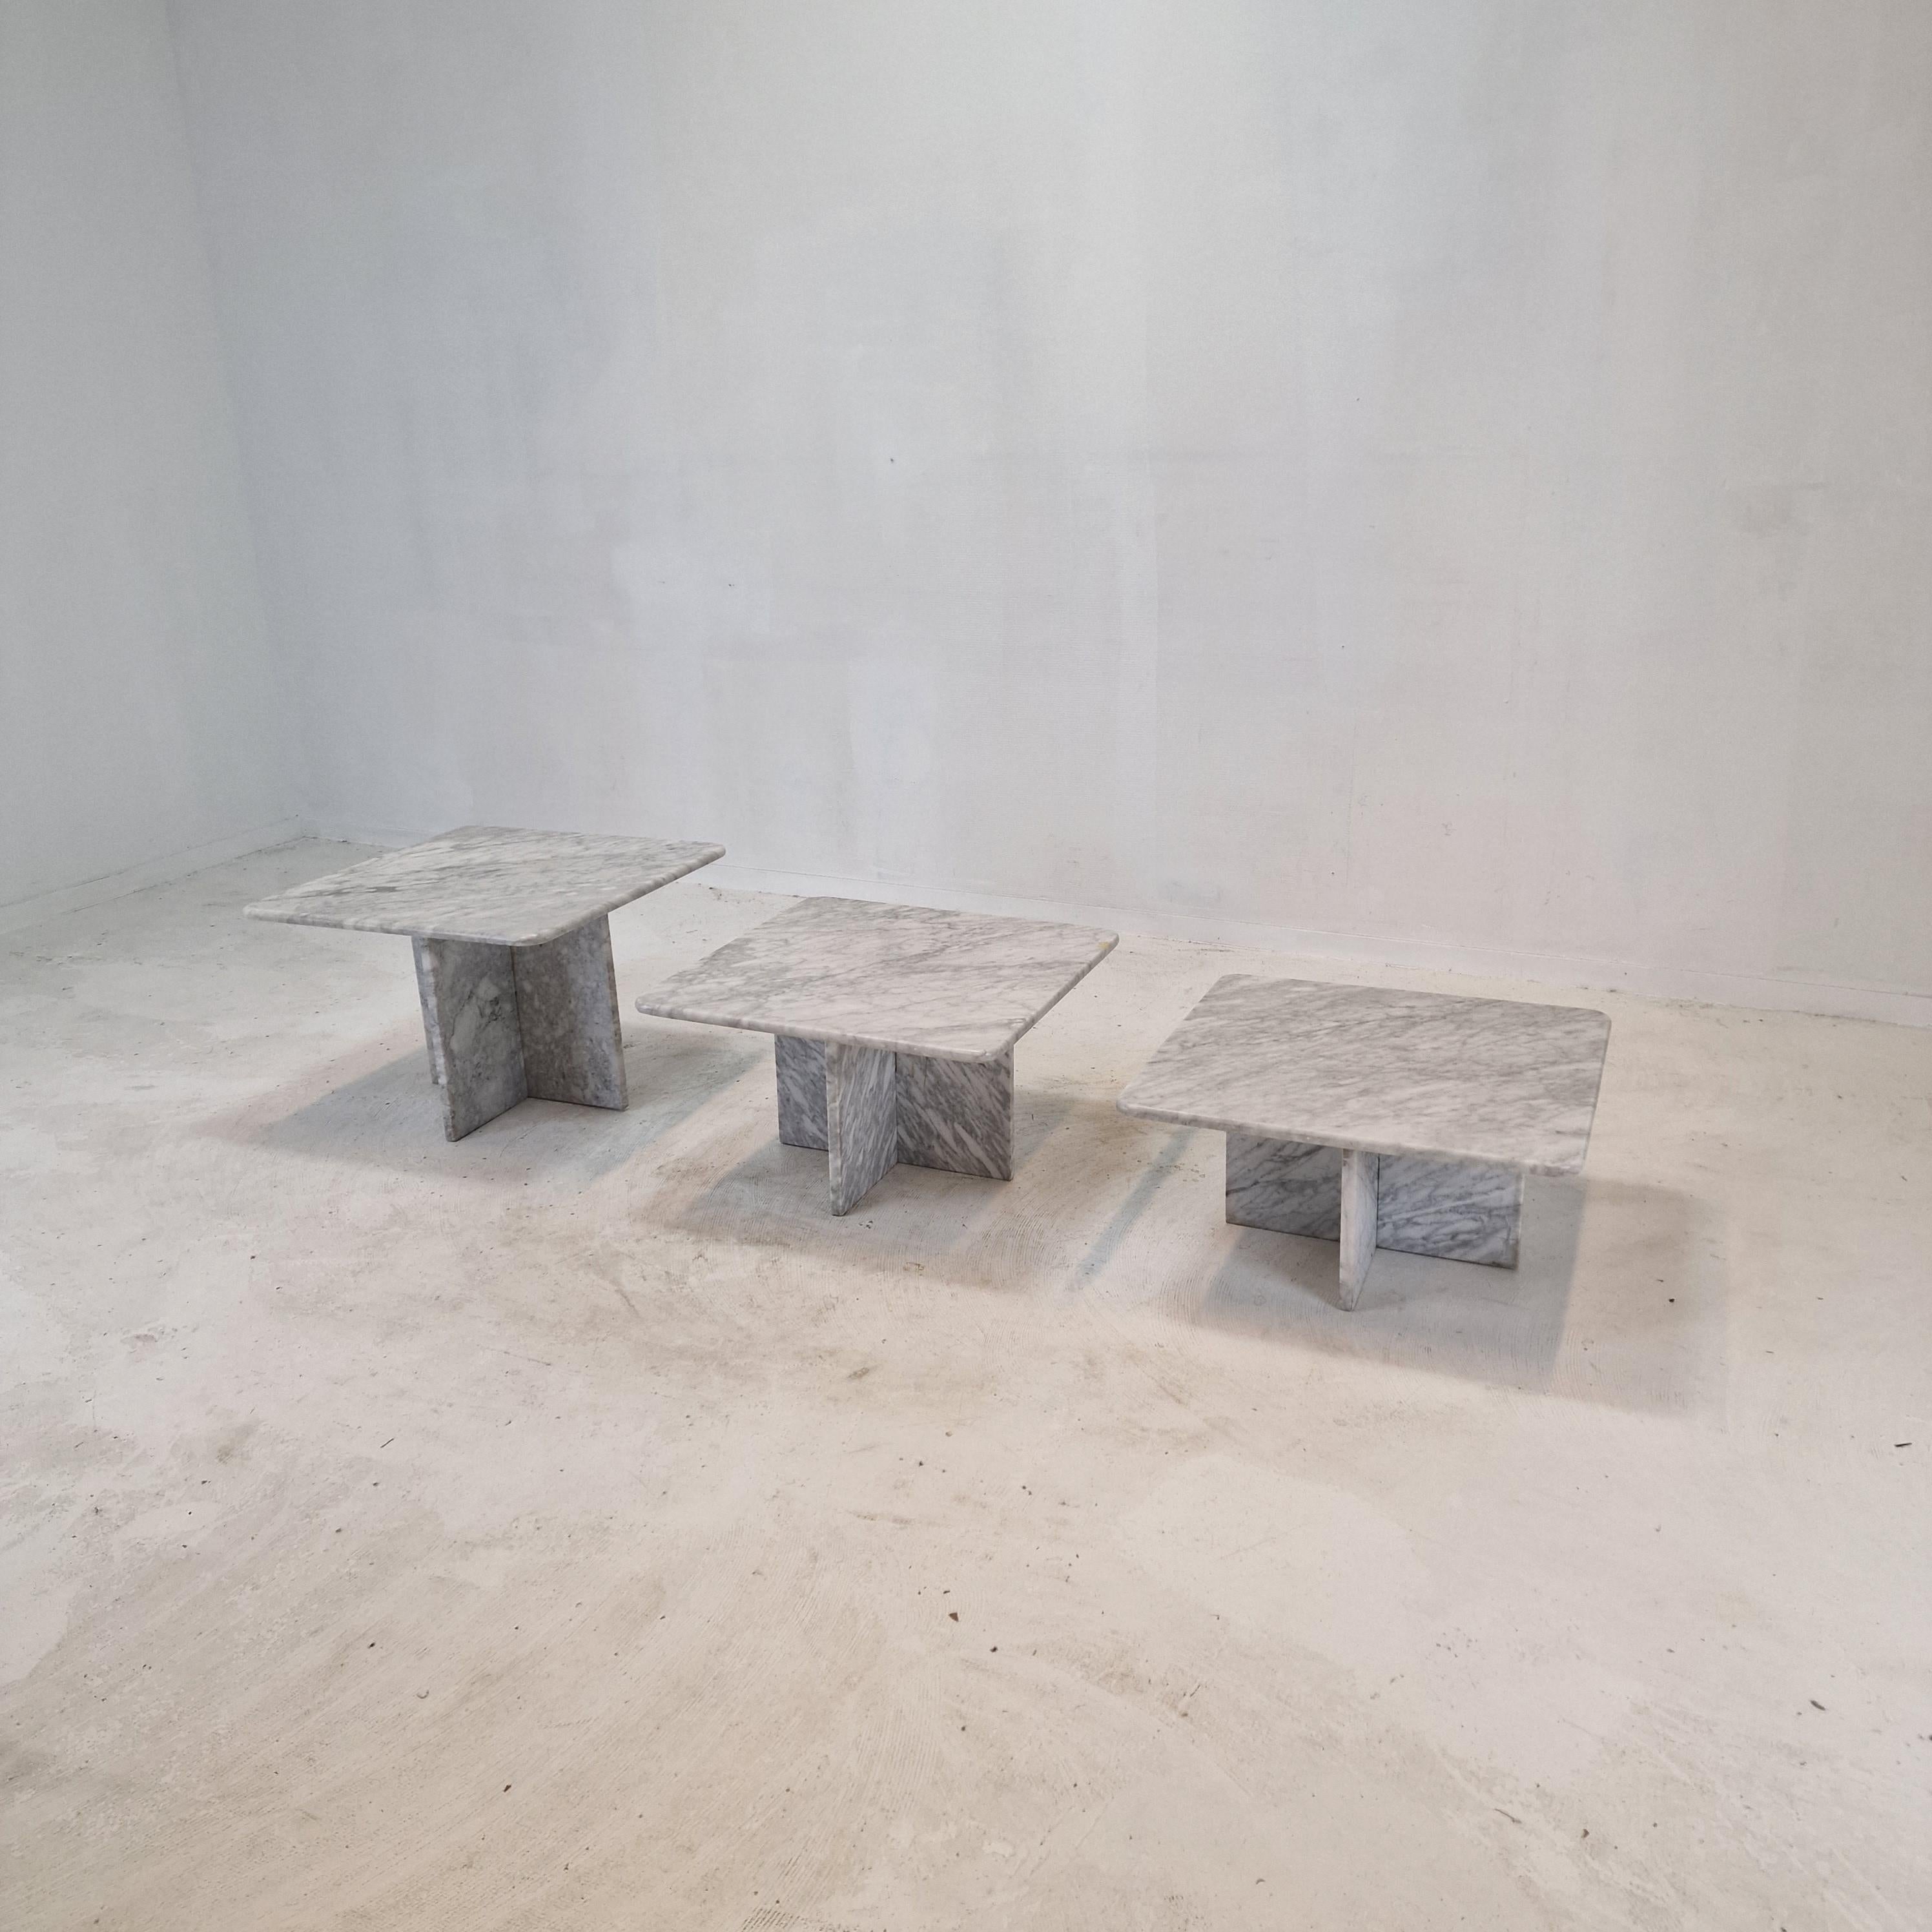 Late 20th Century Set of 3 Italian Marble Coffee or Side Tables, 1970s For Sale